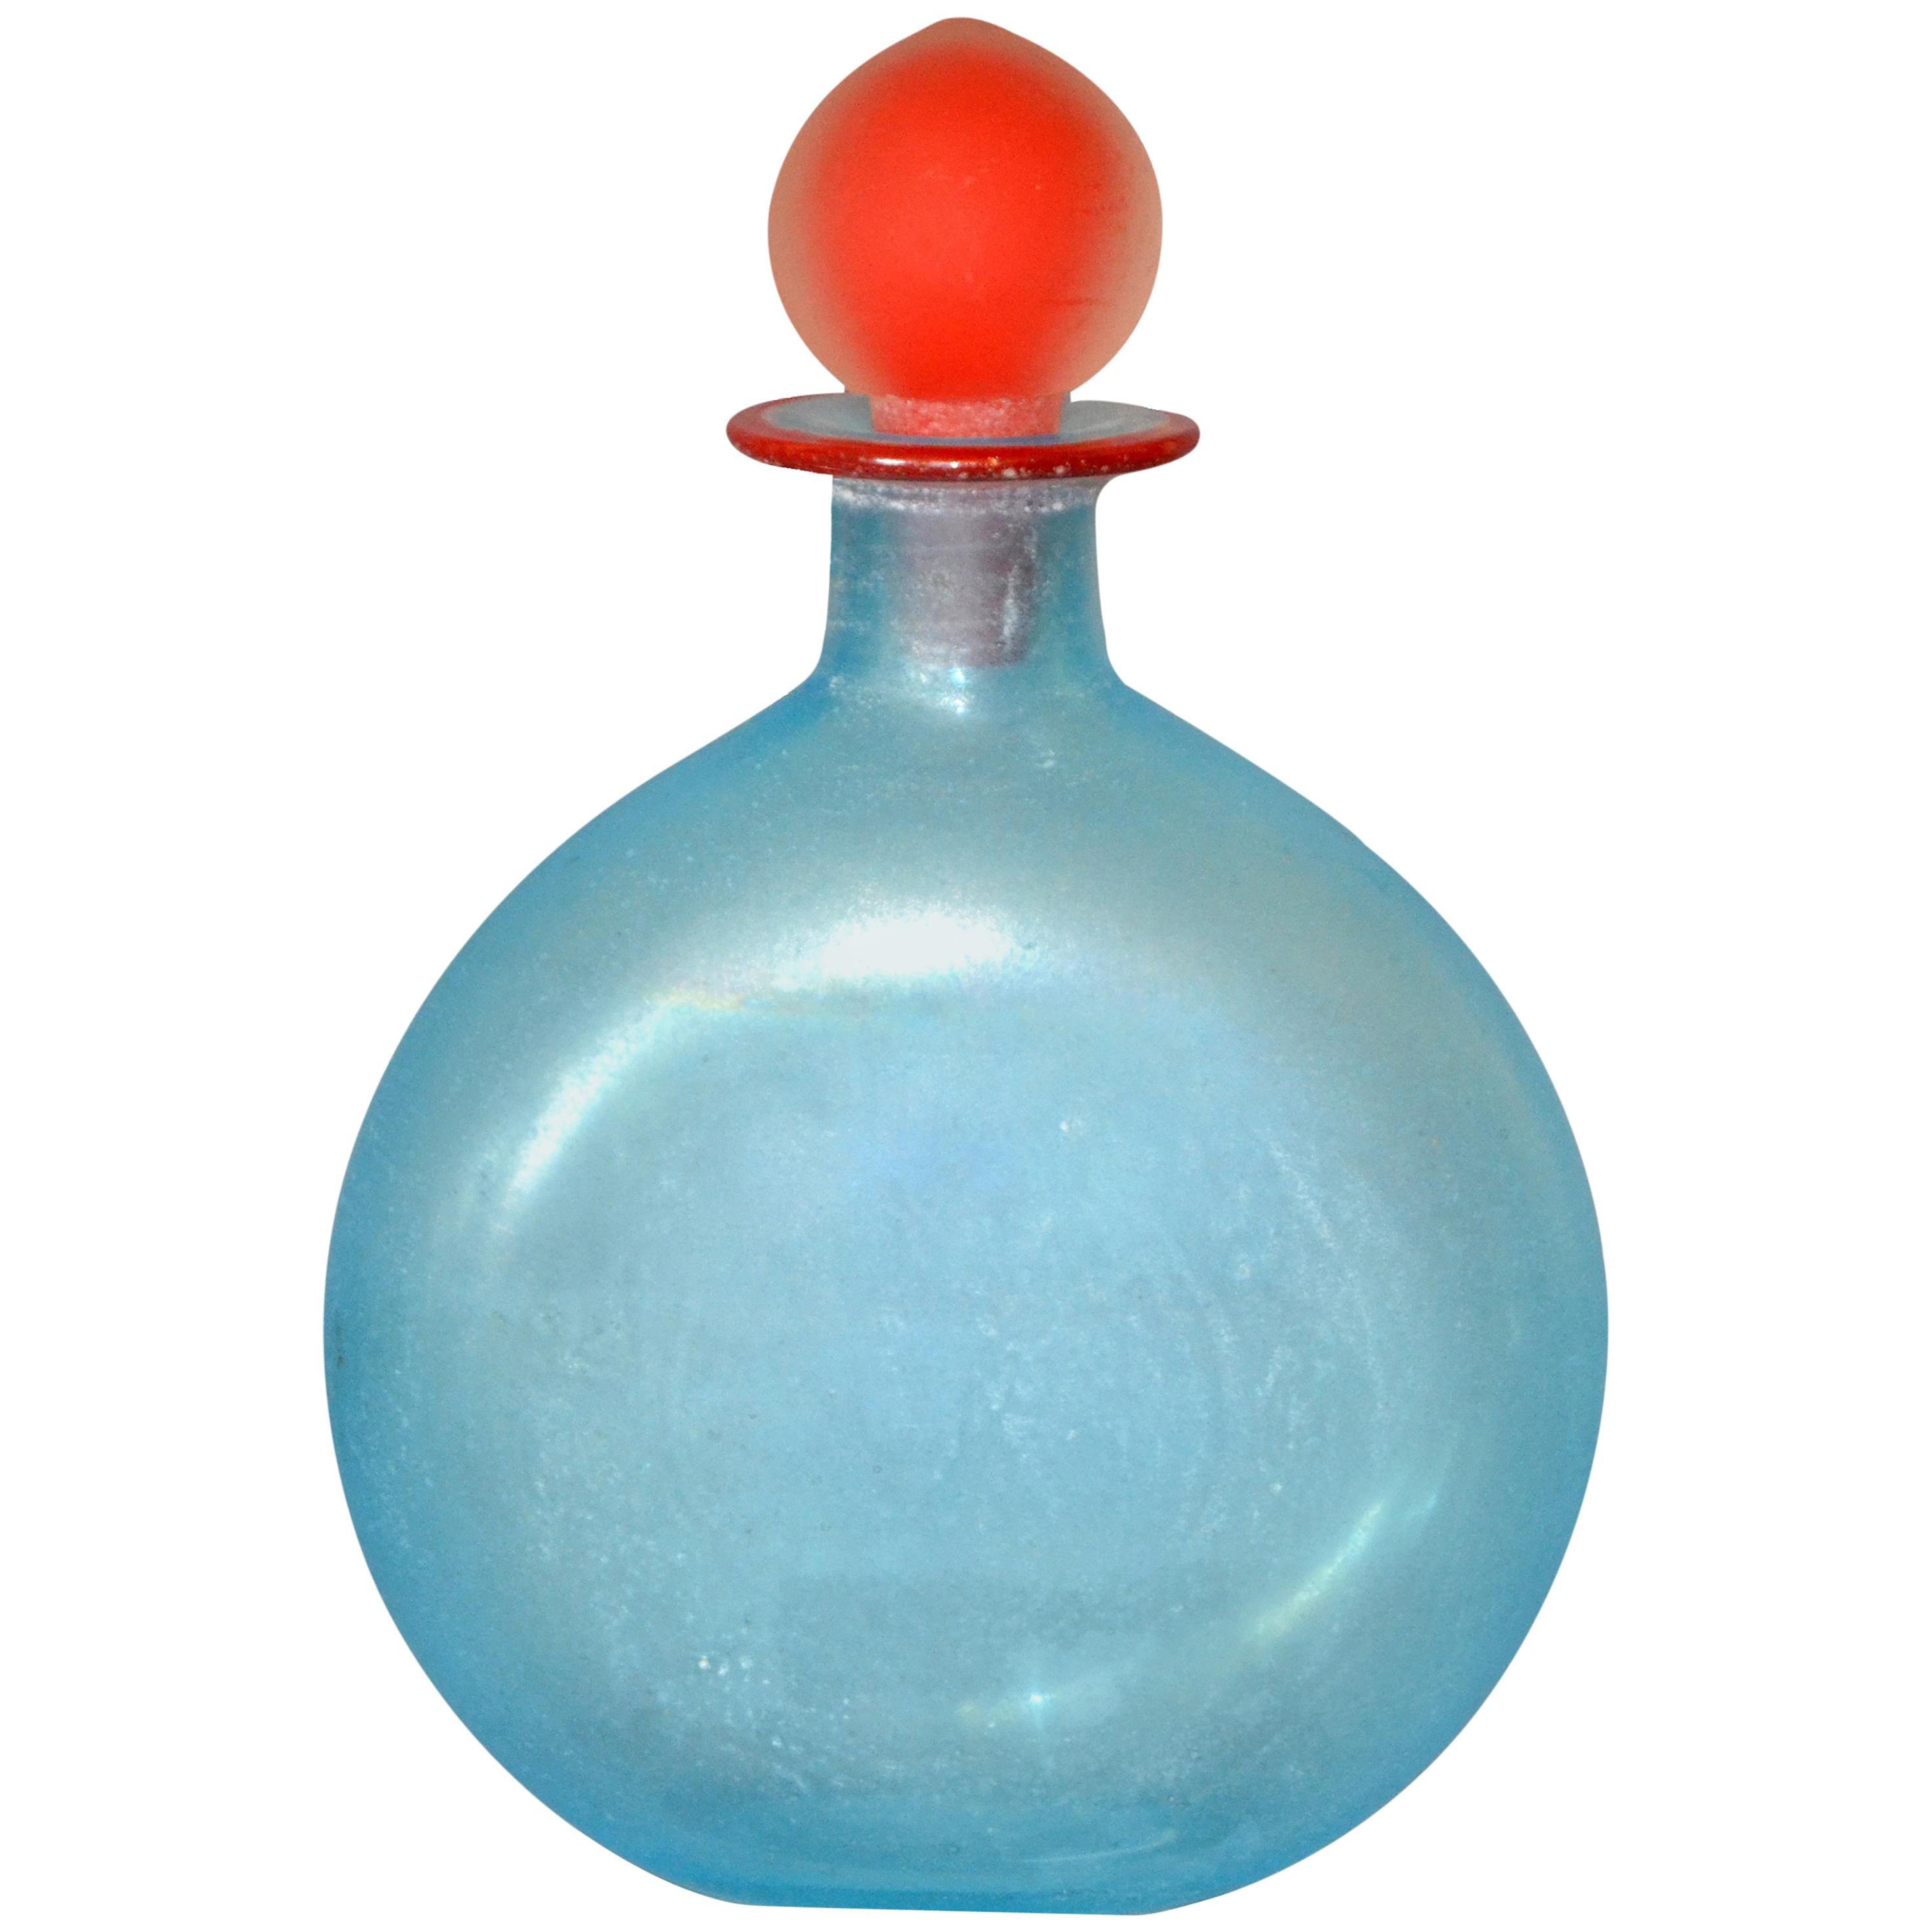 Venetian Blue Murano Art Glass Decanter, Vessel with Red Stopper, Italy